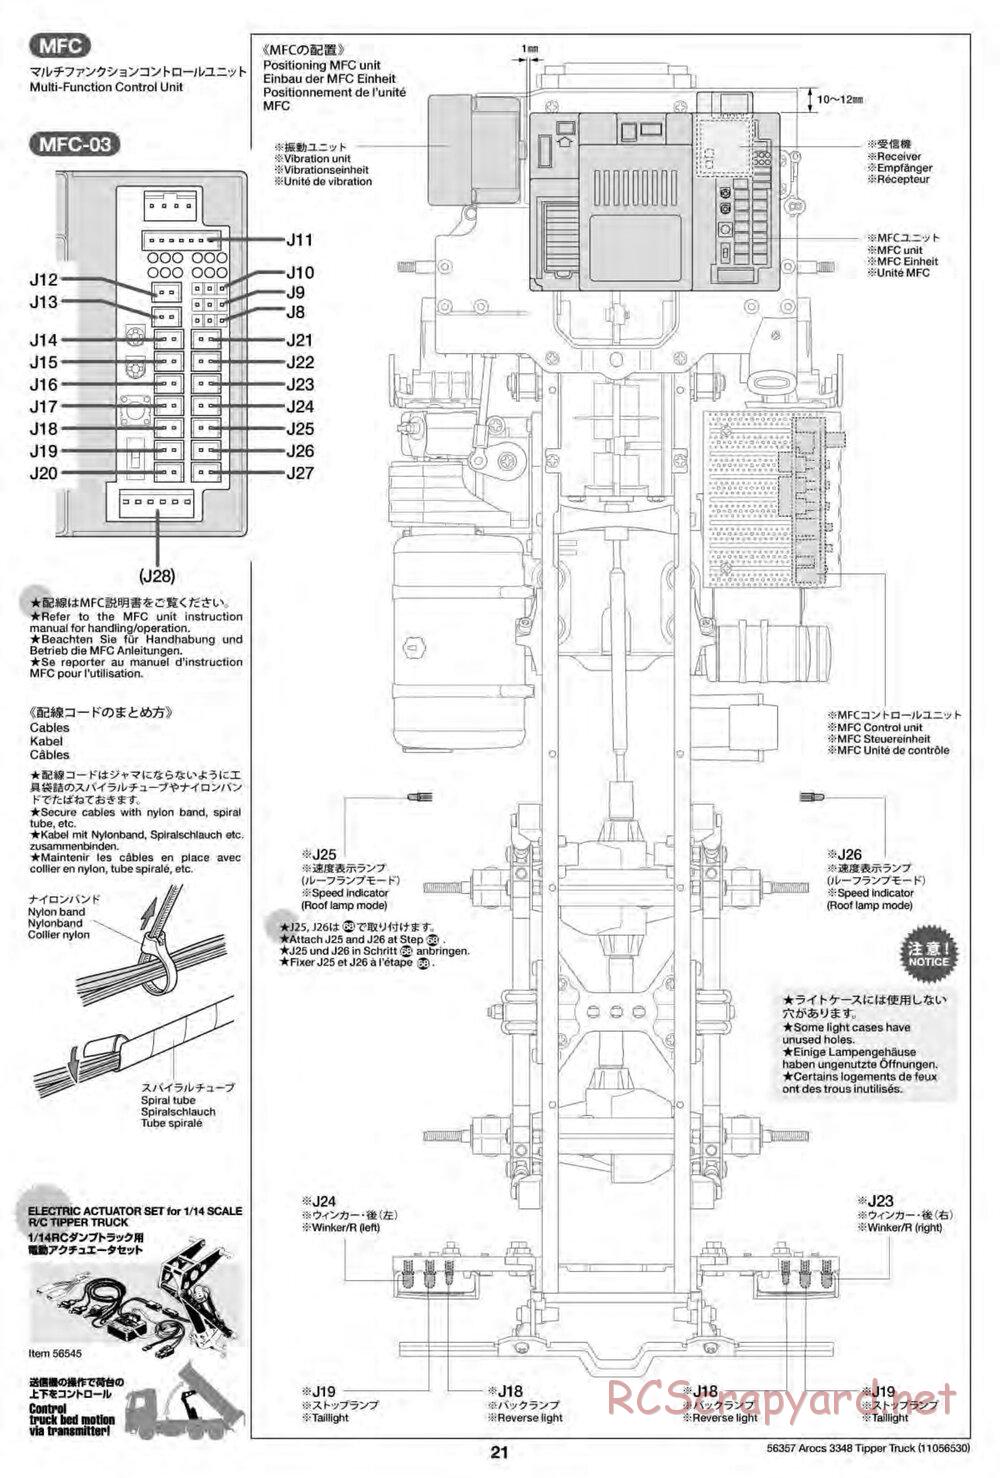 Tamiya - Mercedes-Benz Arocs 3348 6x4 Tipper Truck Chassis - Manual - Page 21